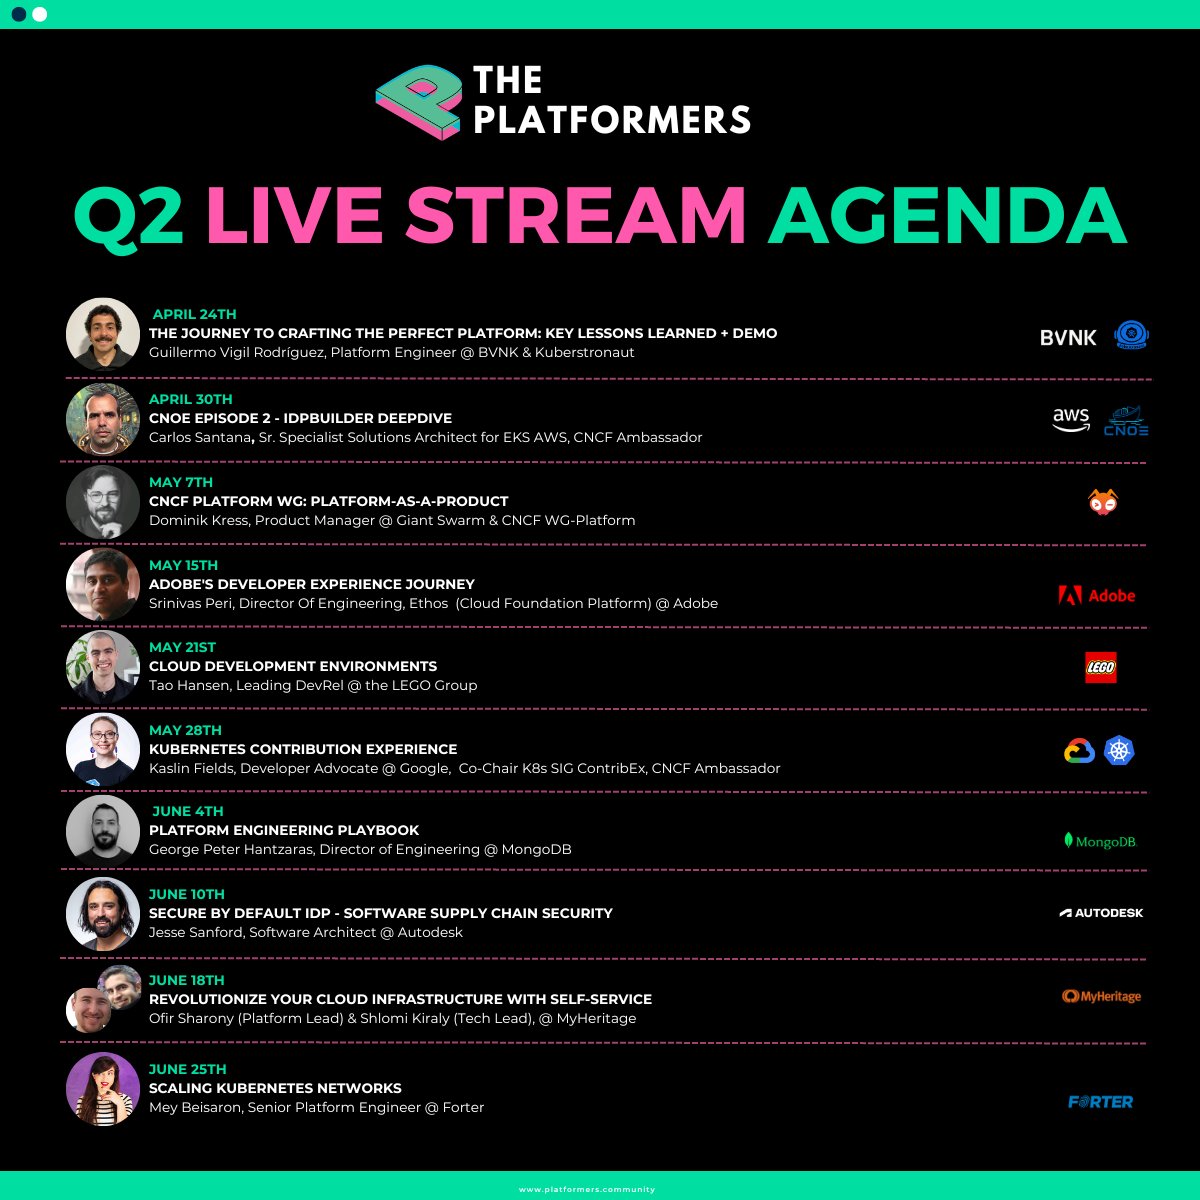 We are excited to share our livestream agenda for Q2! We have such an amazing lineup of Platform Engineering experts from all over the world It's going to be EPIC 🤩 📽️Watch & Register on YouTube - youtube.com/@PlatformersCo…